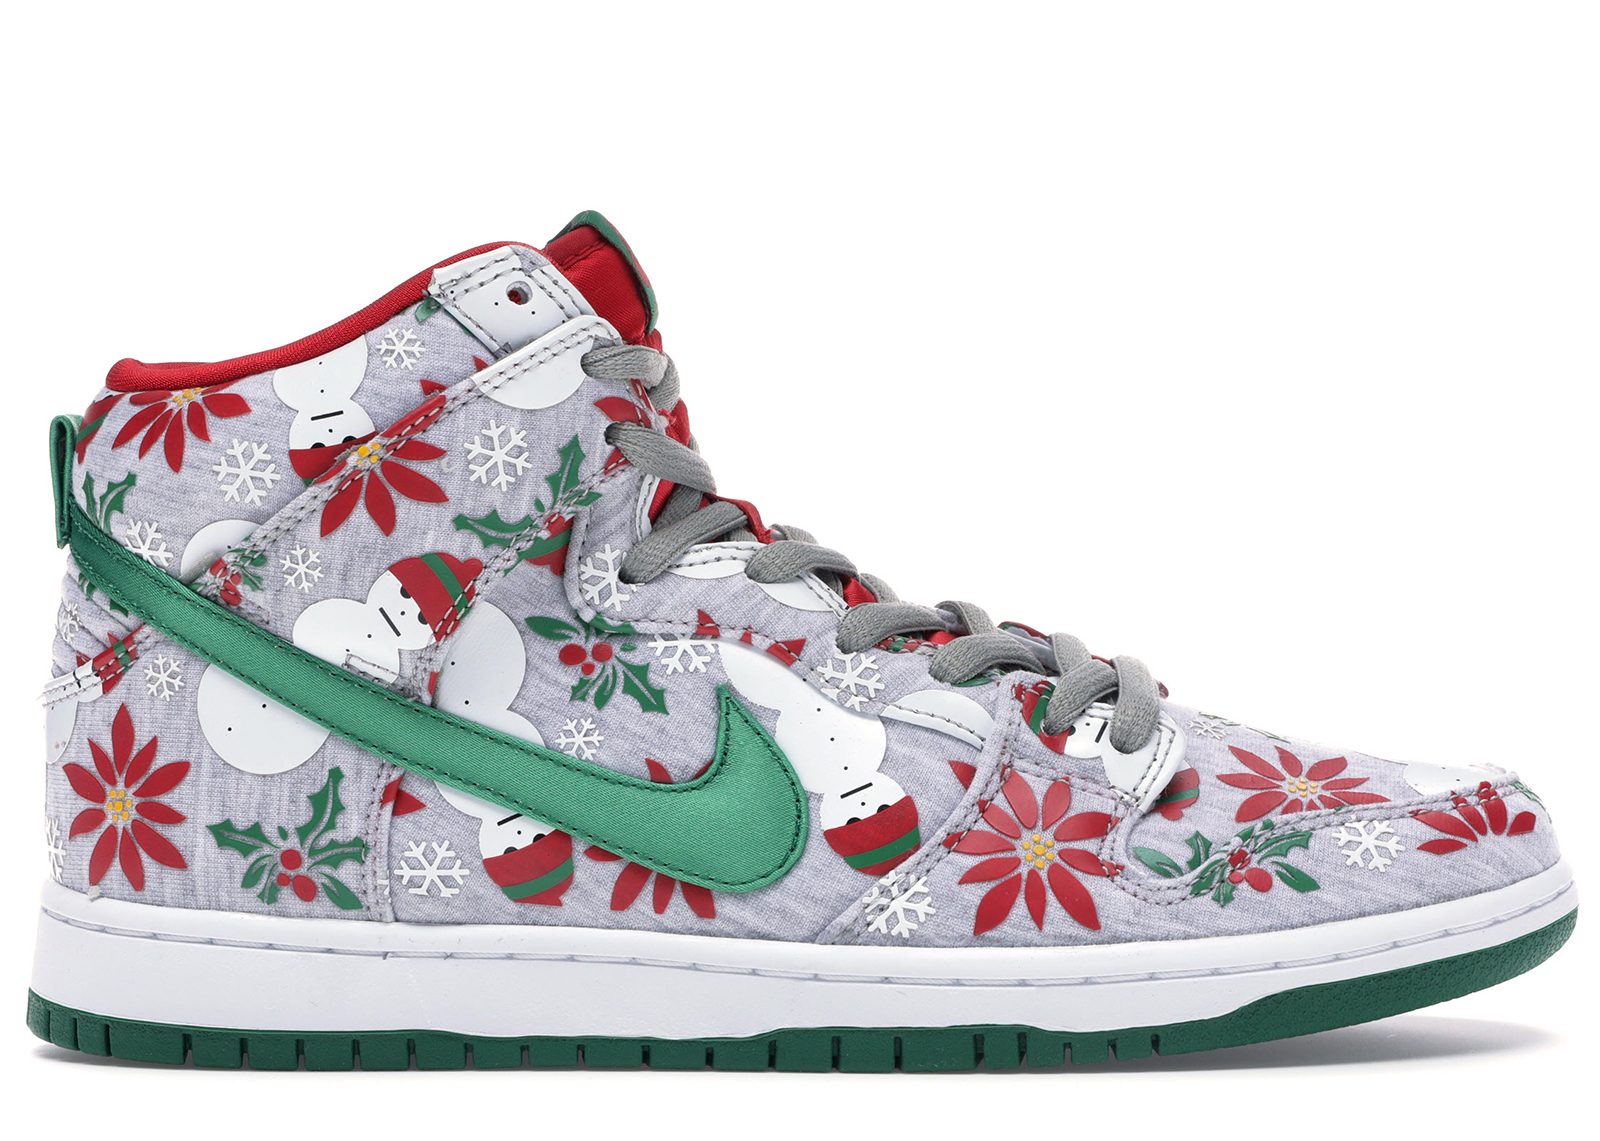 CONCEPTS SB Dunk Ugly Christmas Sweater